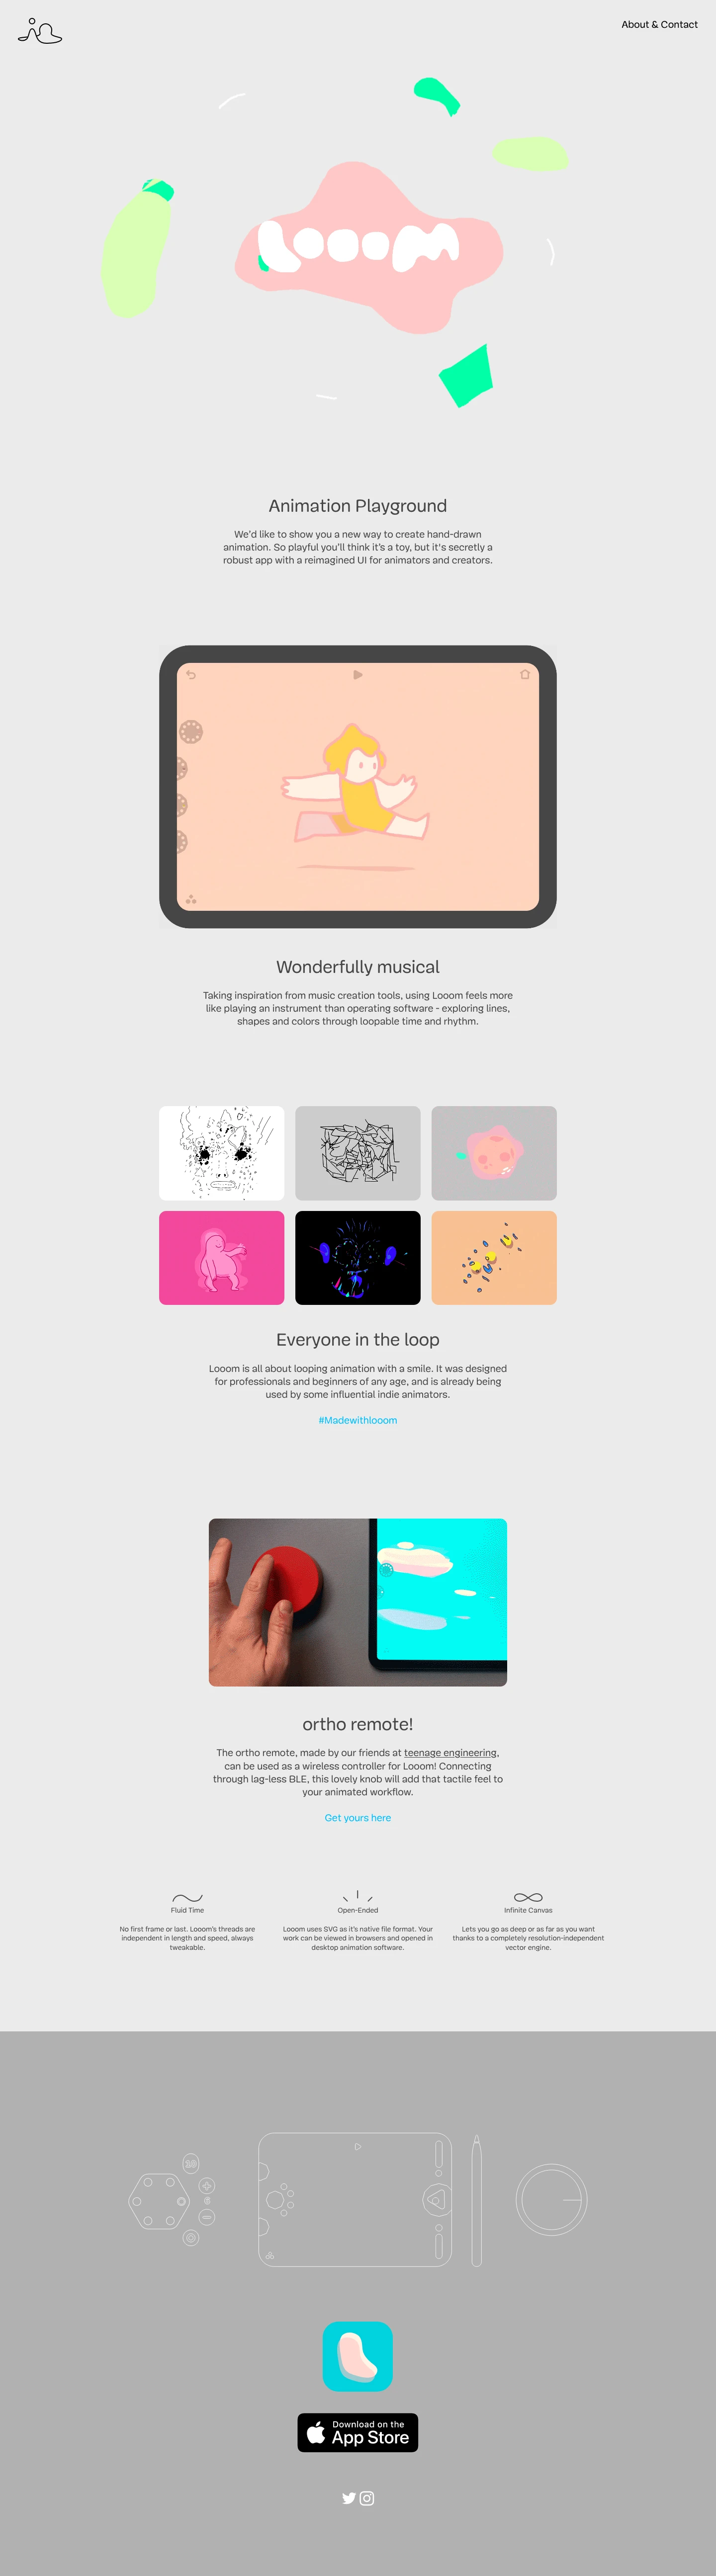 iorama.studio Landing Page Example: We are Finn Ericson and Eran Hilleli. United by a complimentry skillset we bothshare the love for the visual, audio and code. Inspired by musical instruments andearly video games we set out to createmeaningful and playful experiences forall ages with a hearty focus on creativity.